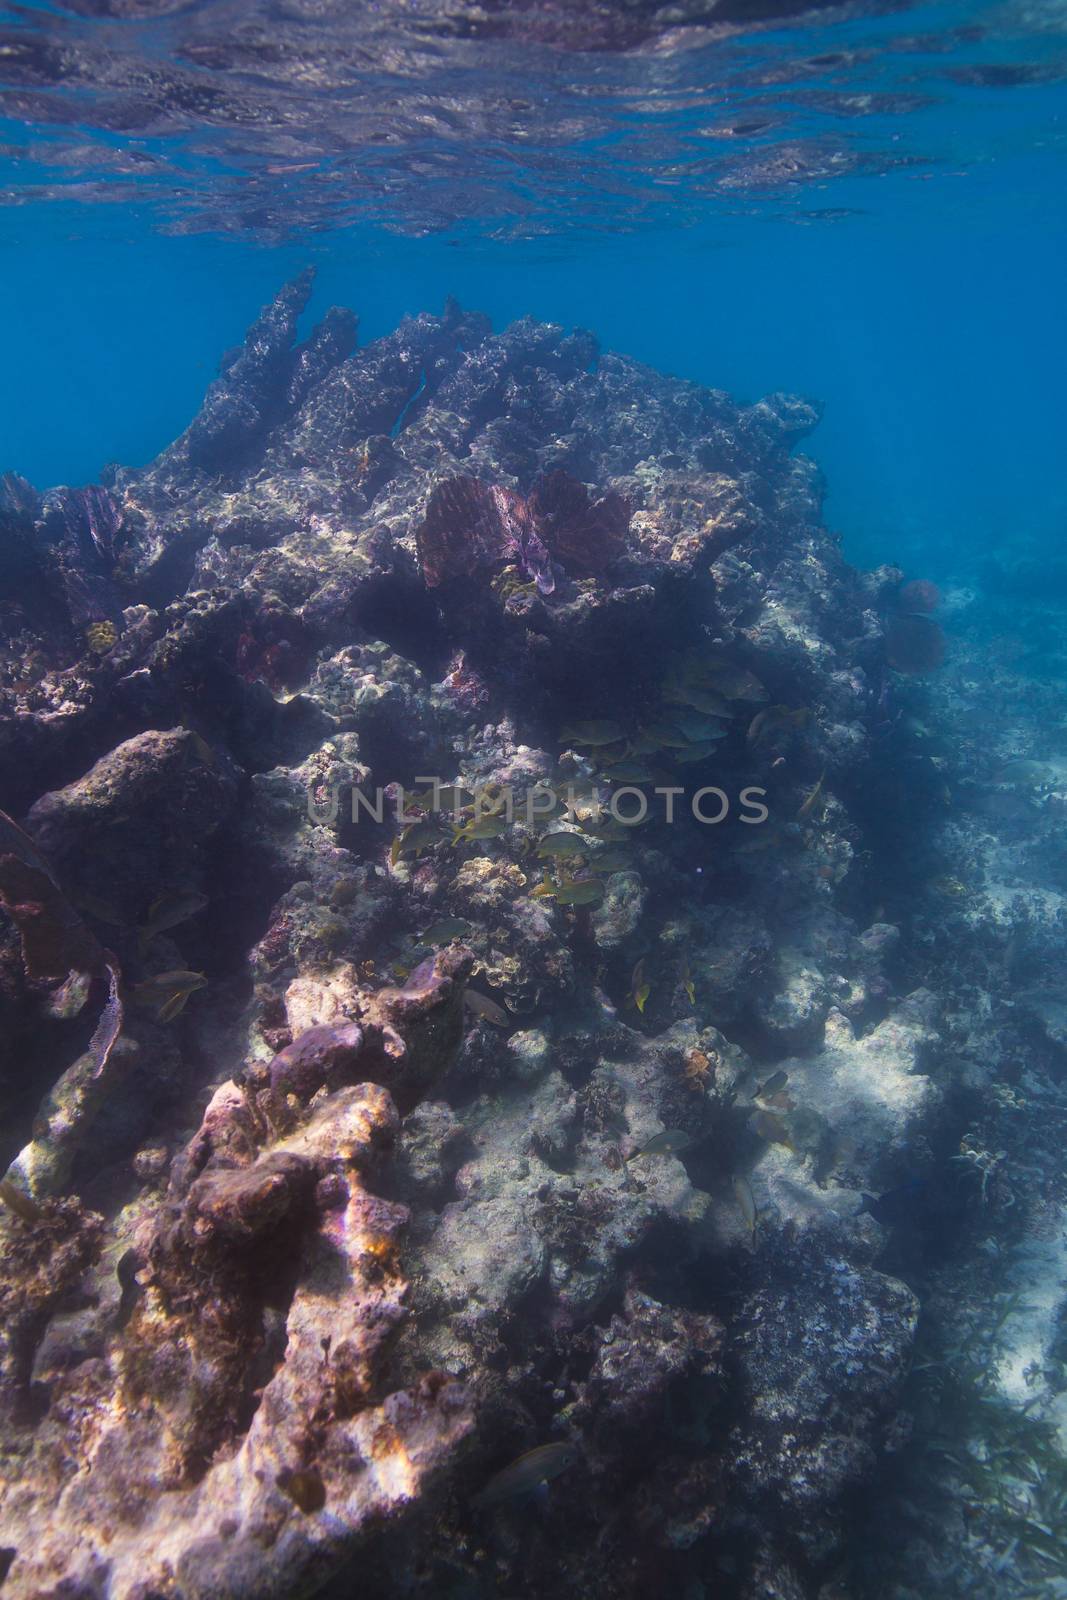 Large school of french grunt hidding under a coral mountain